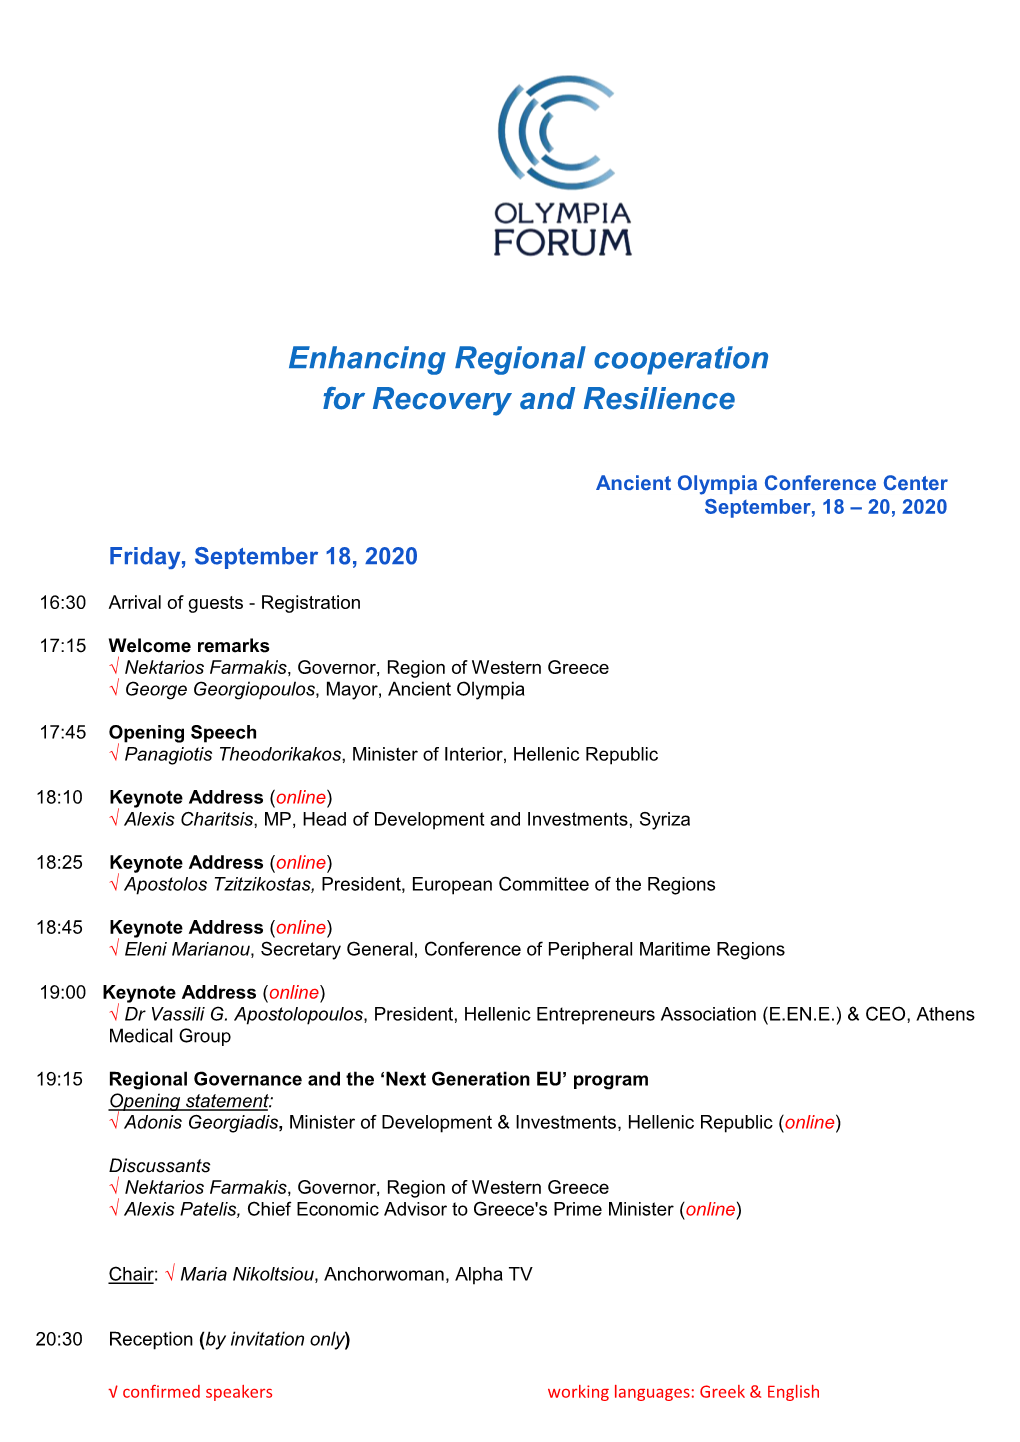 Enhancing Regional Cooperation for Recovery and Resilience